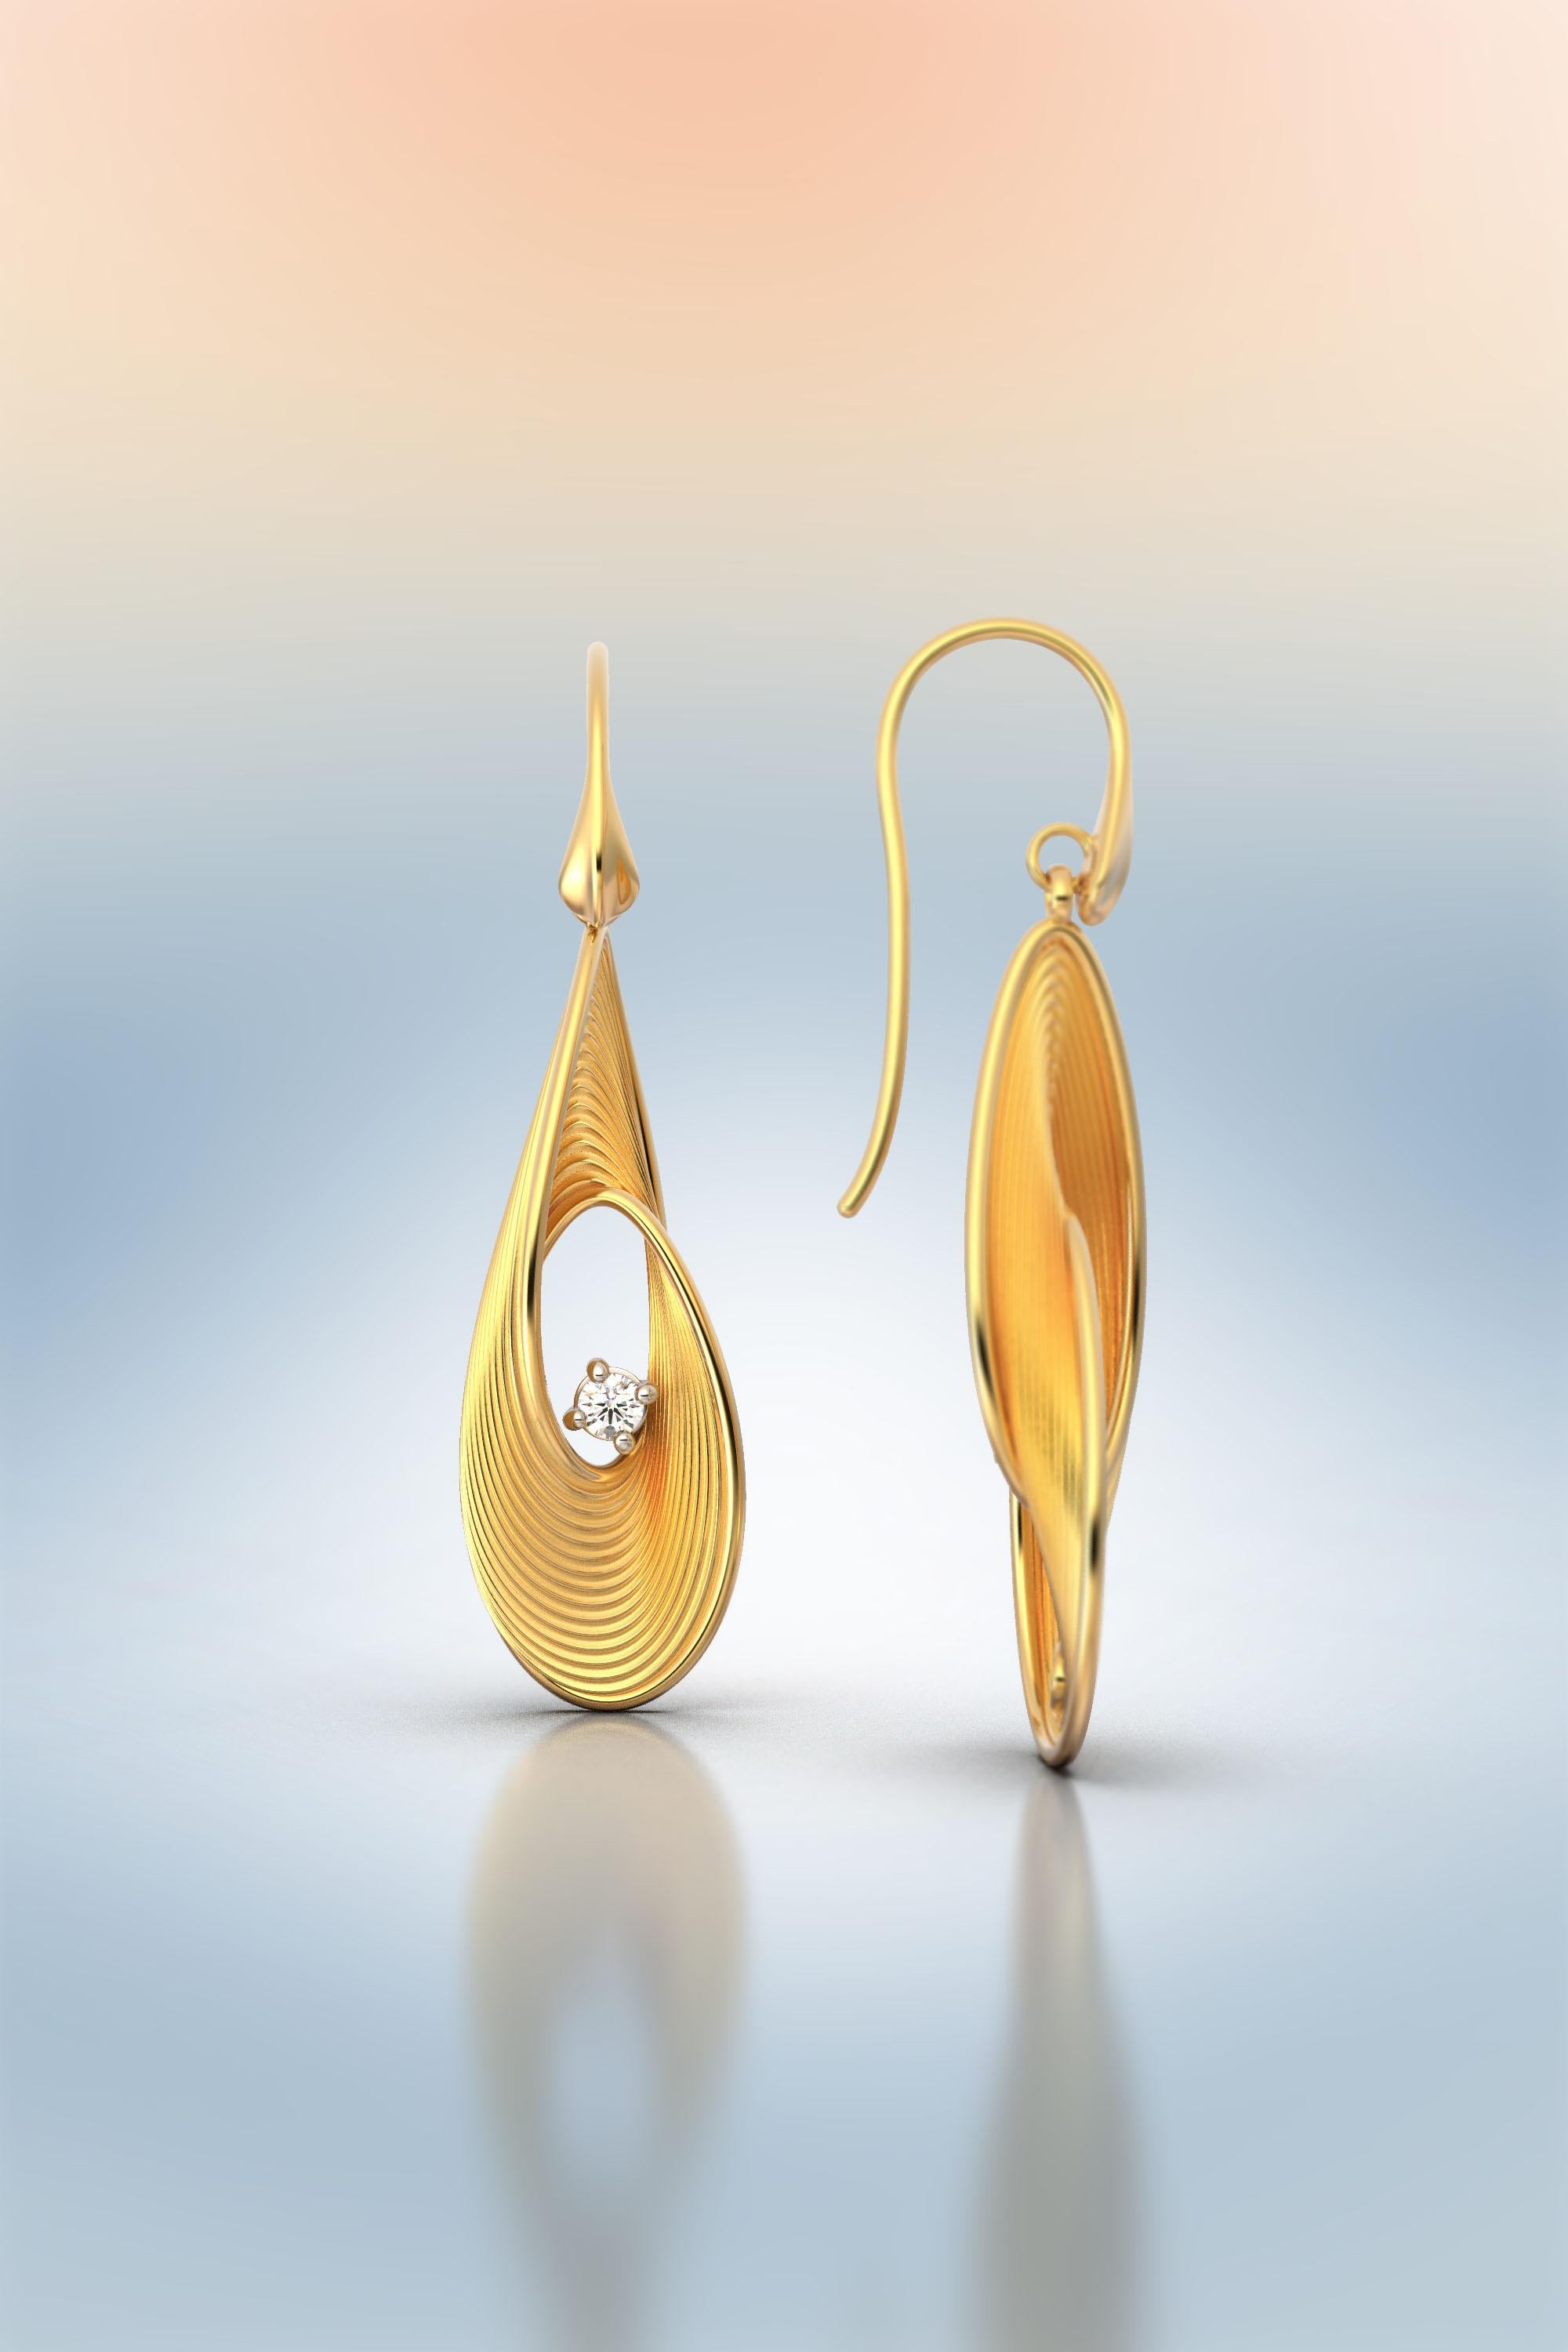 Contemporary Oltremare Gioielli Diamond Earrings, Dangle Drop Earrings in 18k Solid Gold For Sale